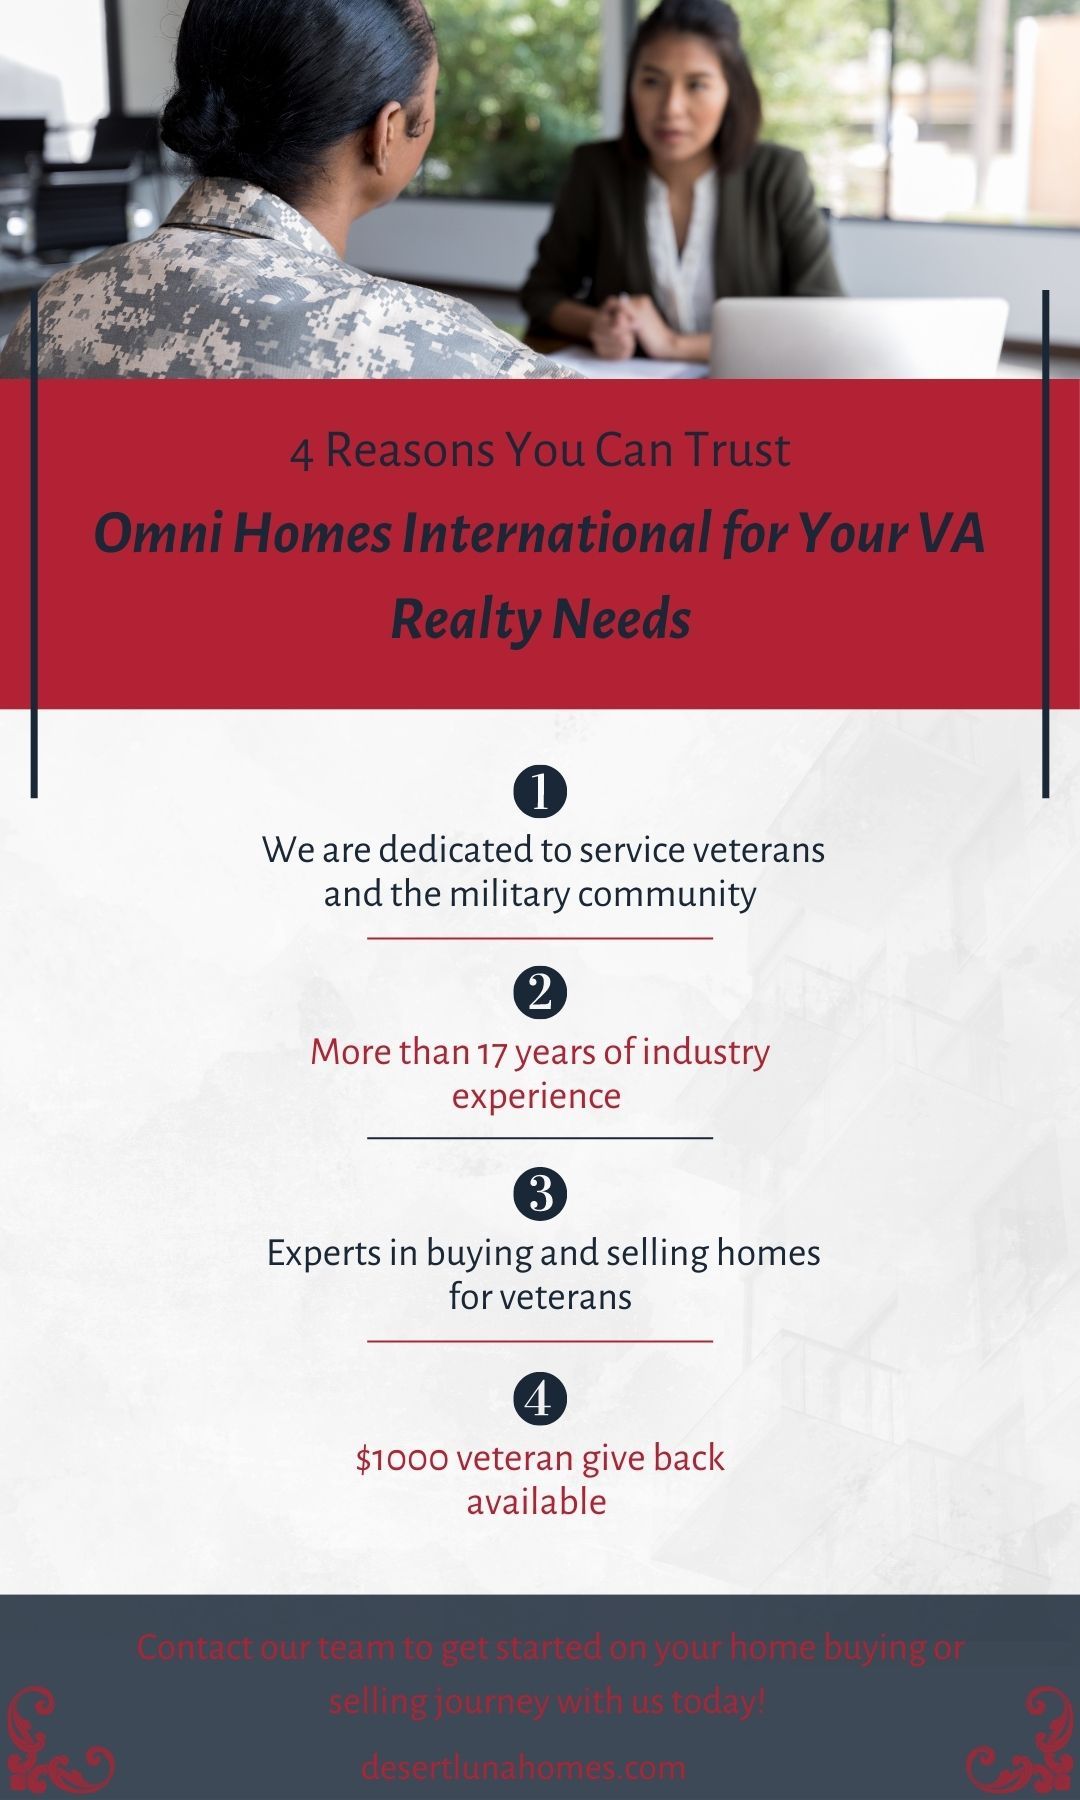 M38439 - IG - How Working With a VA Realtor Can Help You Sell Your Home.jpg